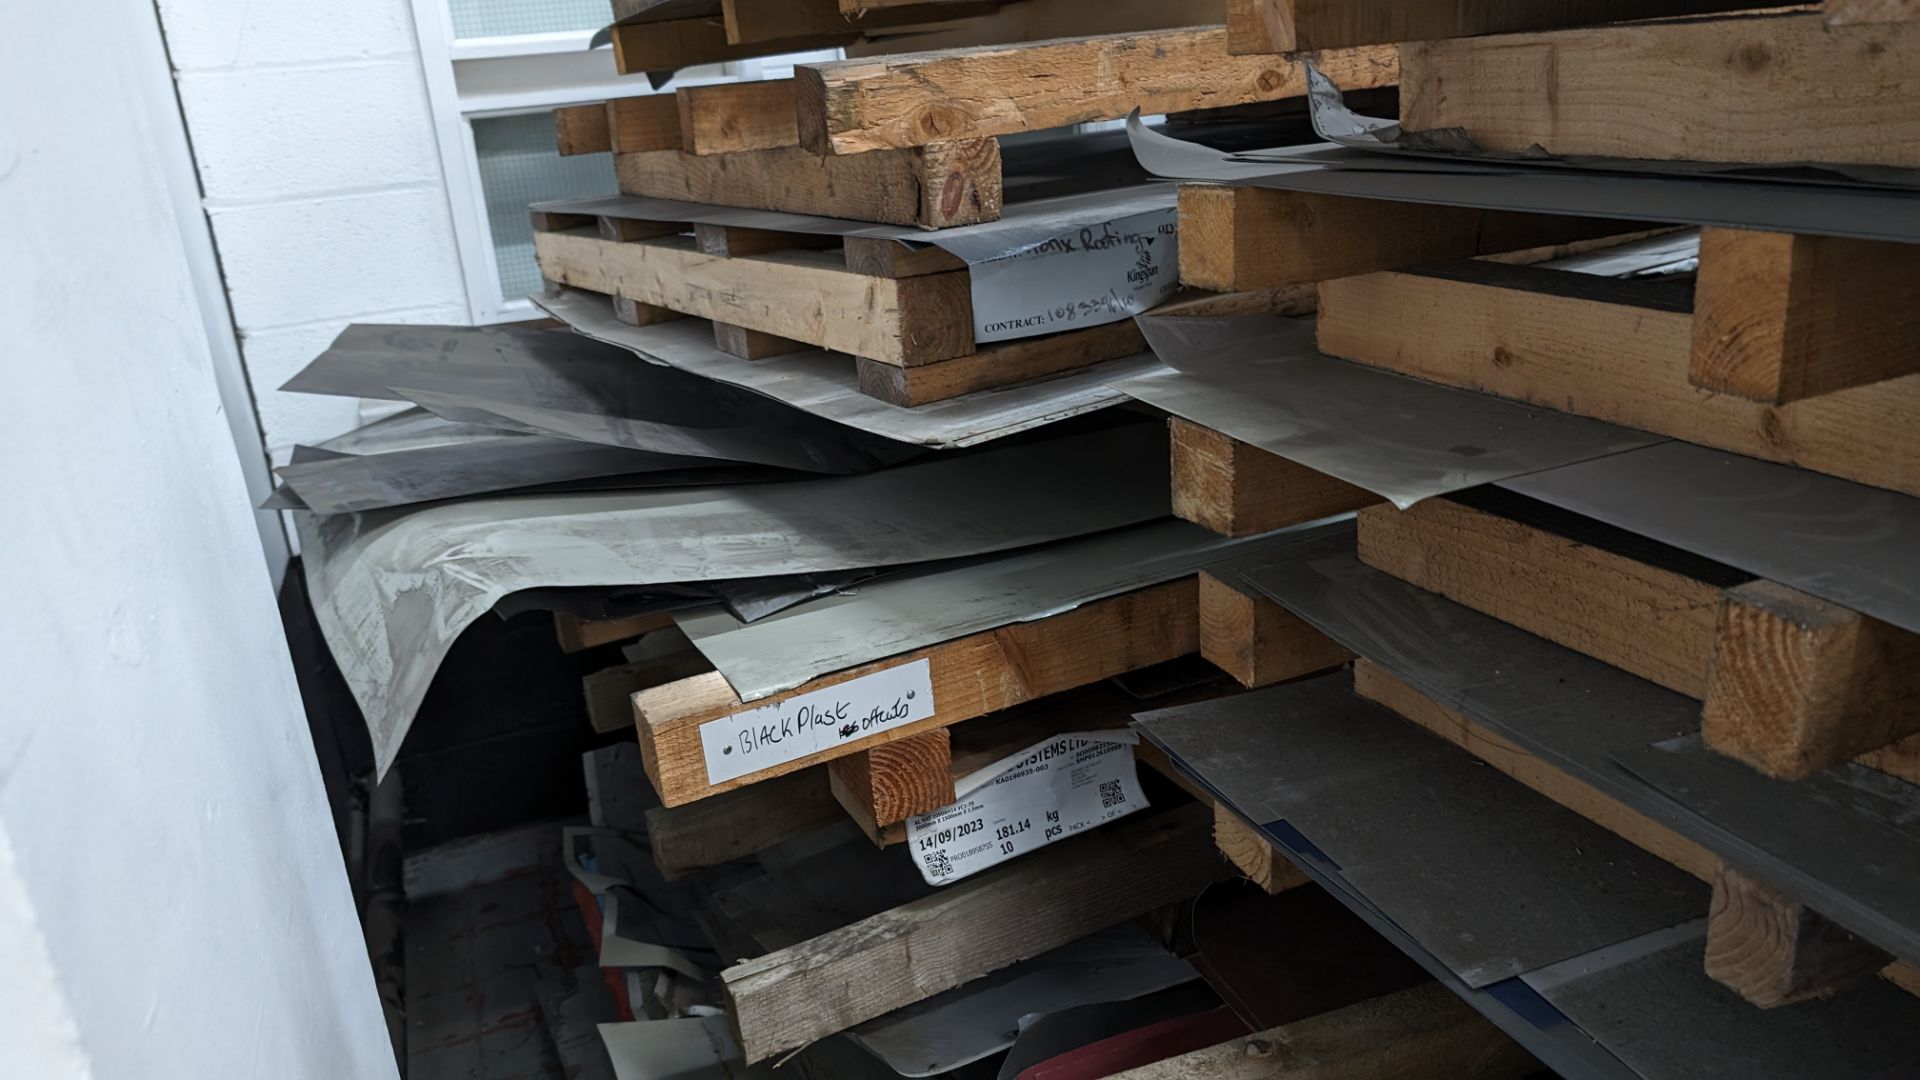 2 stacks of 1250 x 3000mm sheet materials. Each stack comprises 10 - 12 oversized pallets, each pal - Image 18 of 21